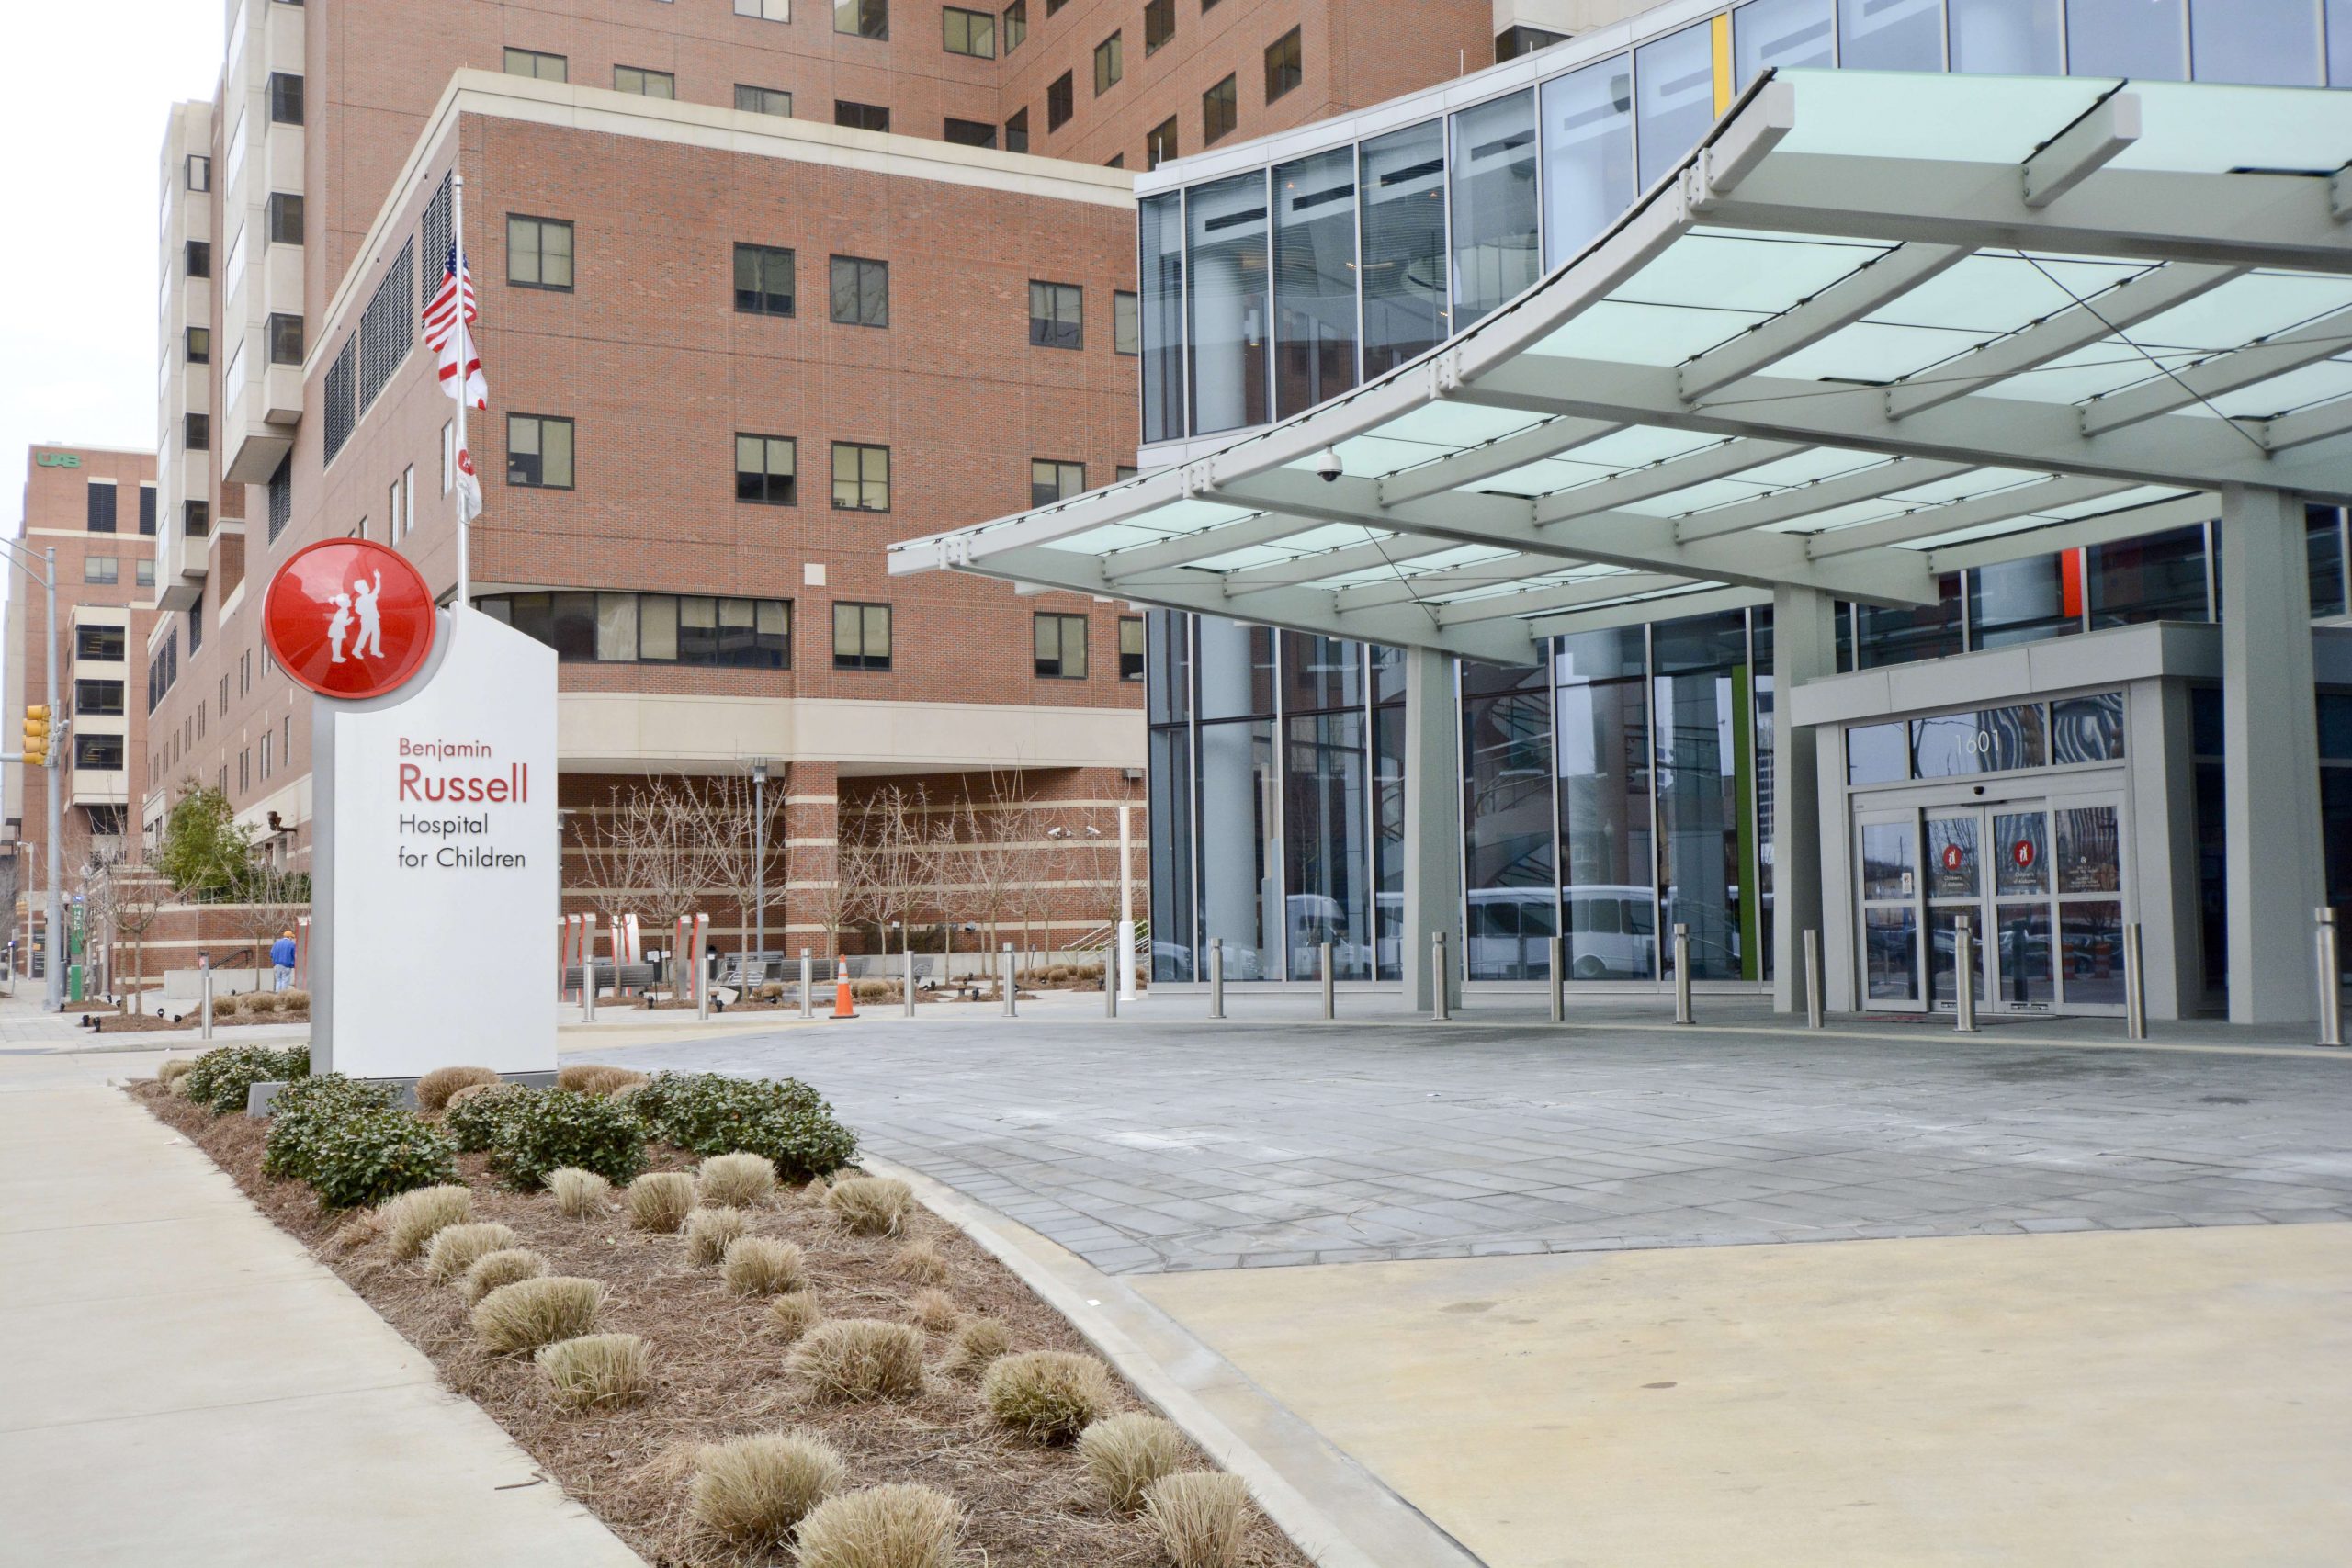 Children's of Alabama is the third-largest pediatric facility in the U.S.